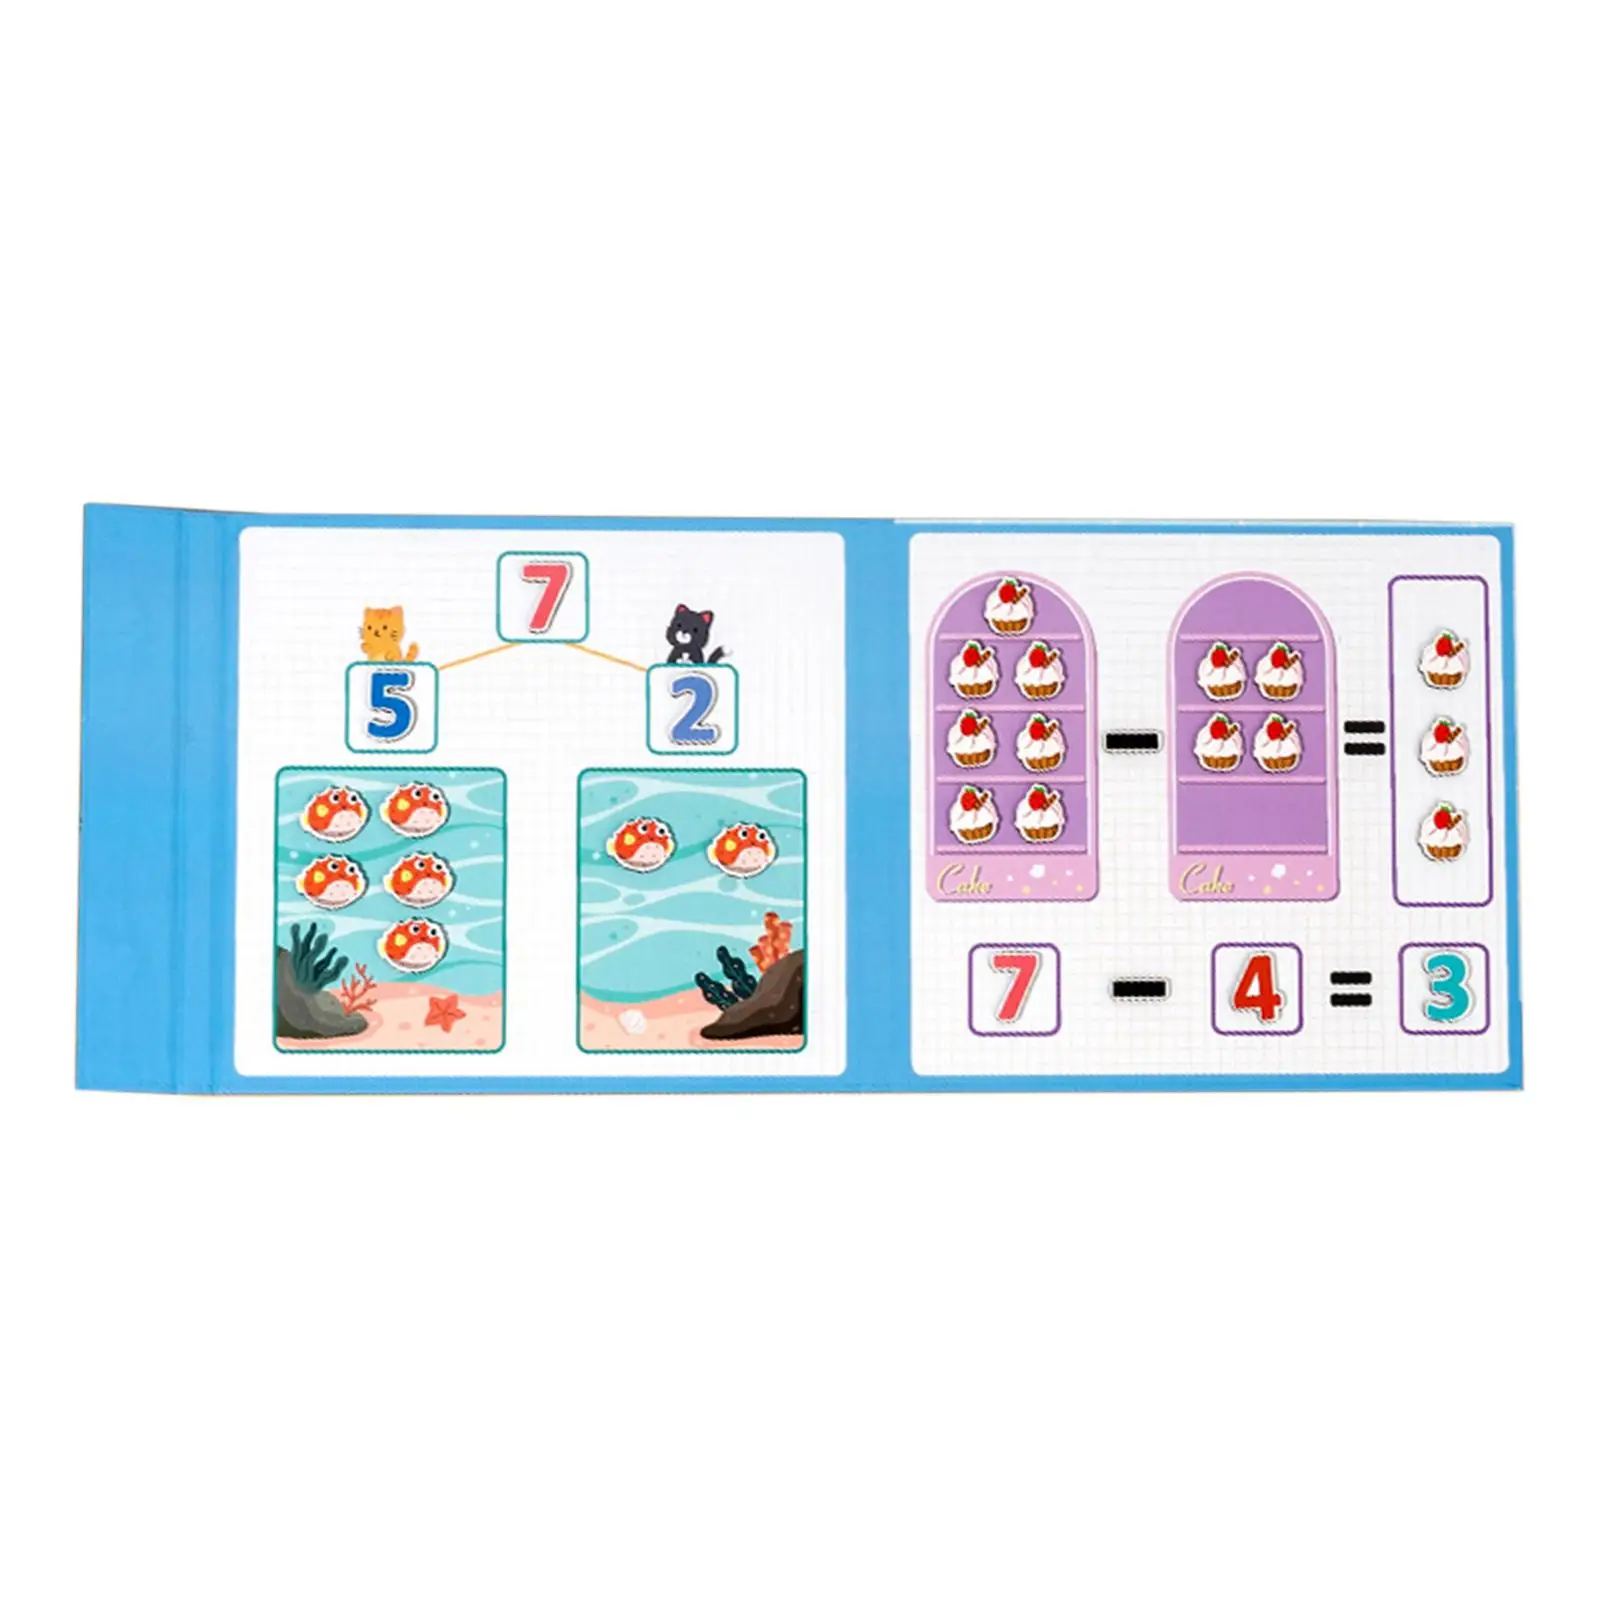 Numbers Decomposition Math Toys Math Toys Learning Teaching Aids Counting Toy for Kindergarten Preschool Children Boy Girls